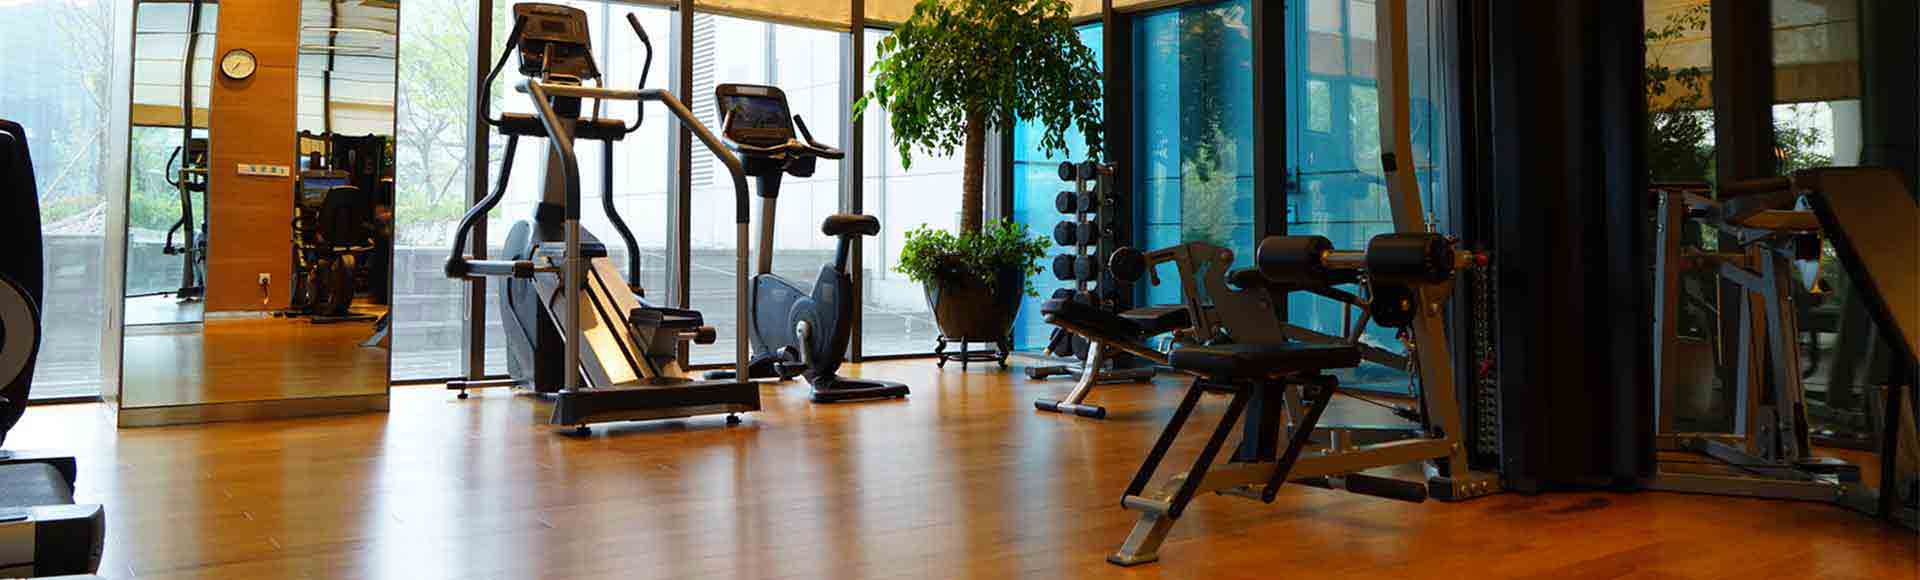 Aralco POS for Fitness and Health Clubs